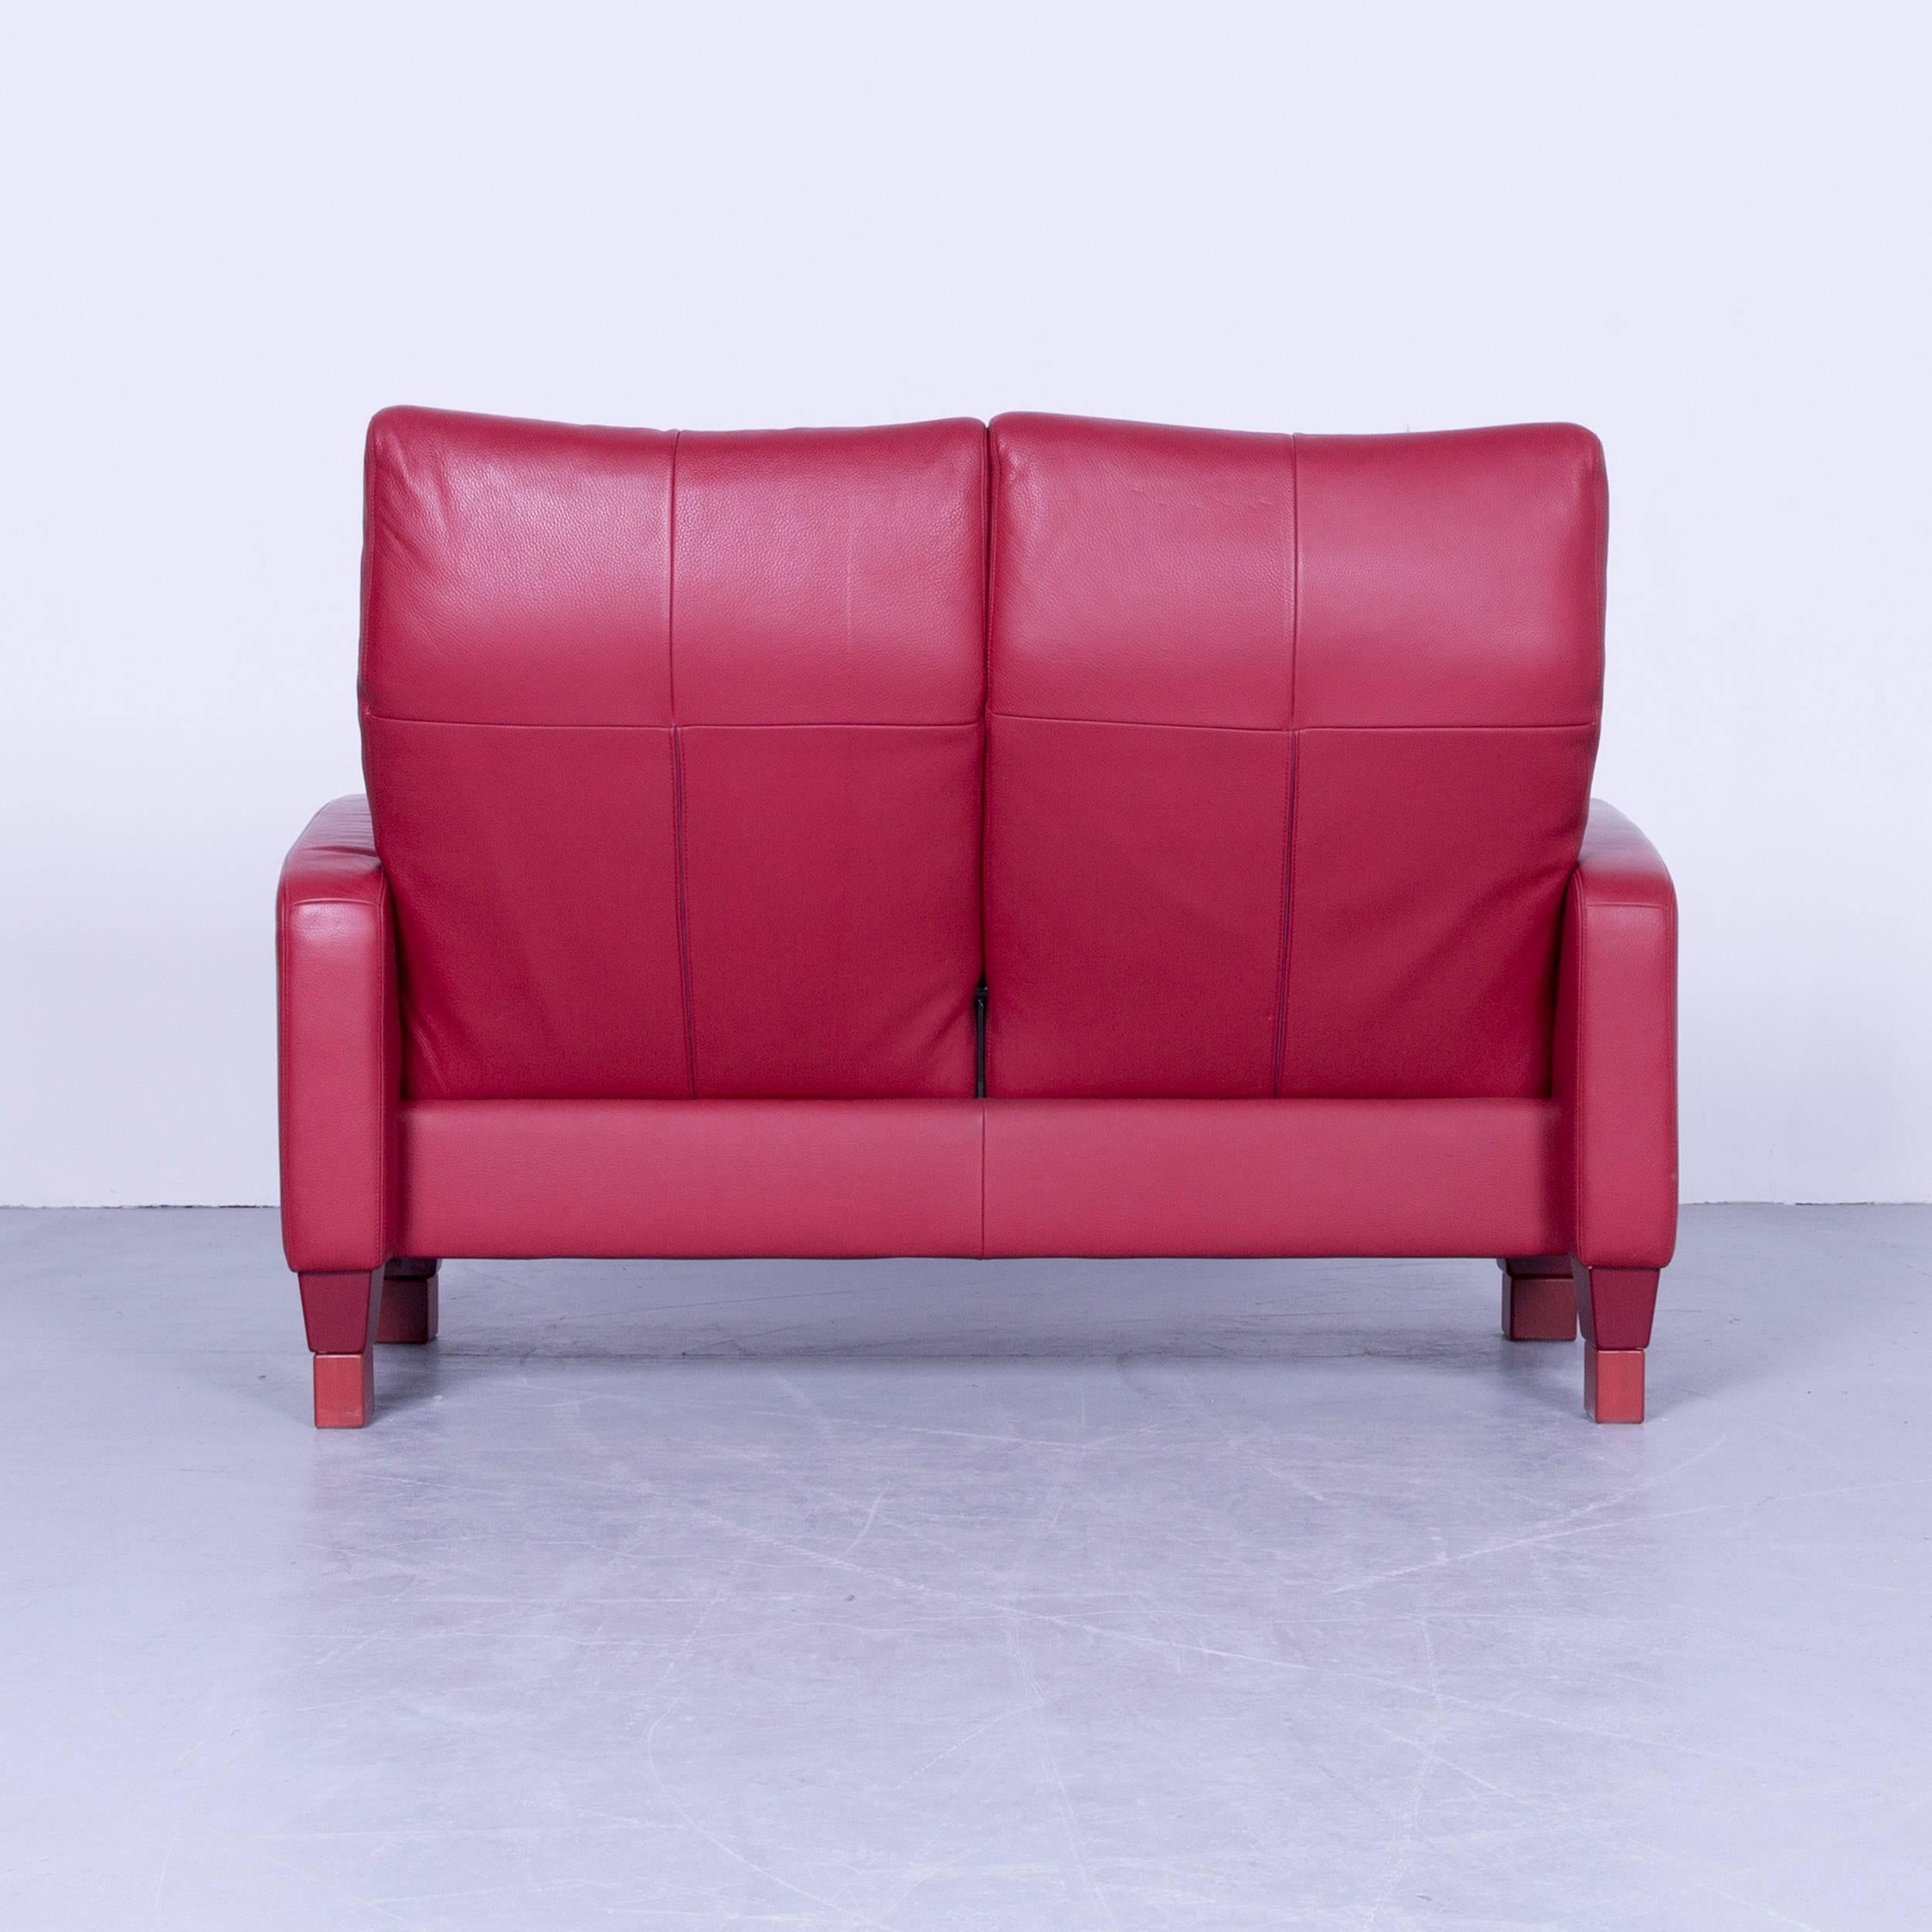 Erpo Designer Sofa Leather Red Two-Seater Couch Modern Recline Function 6